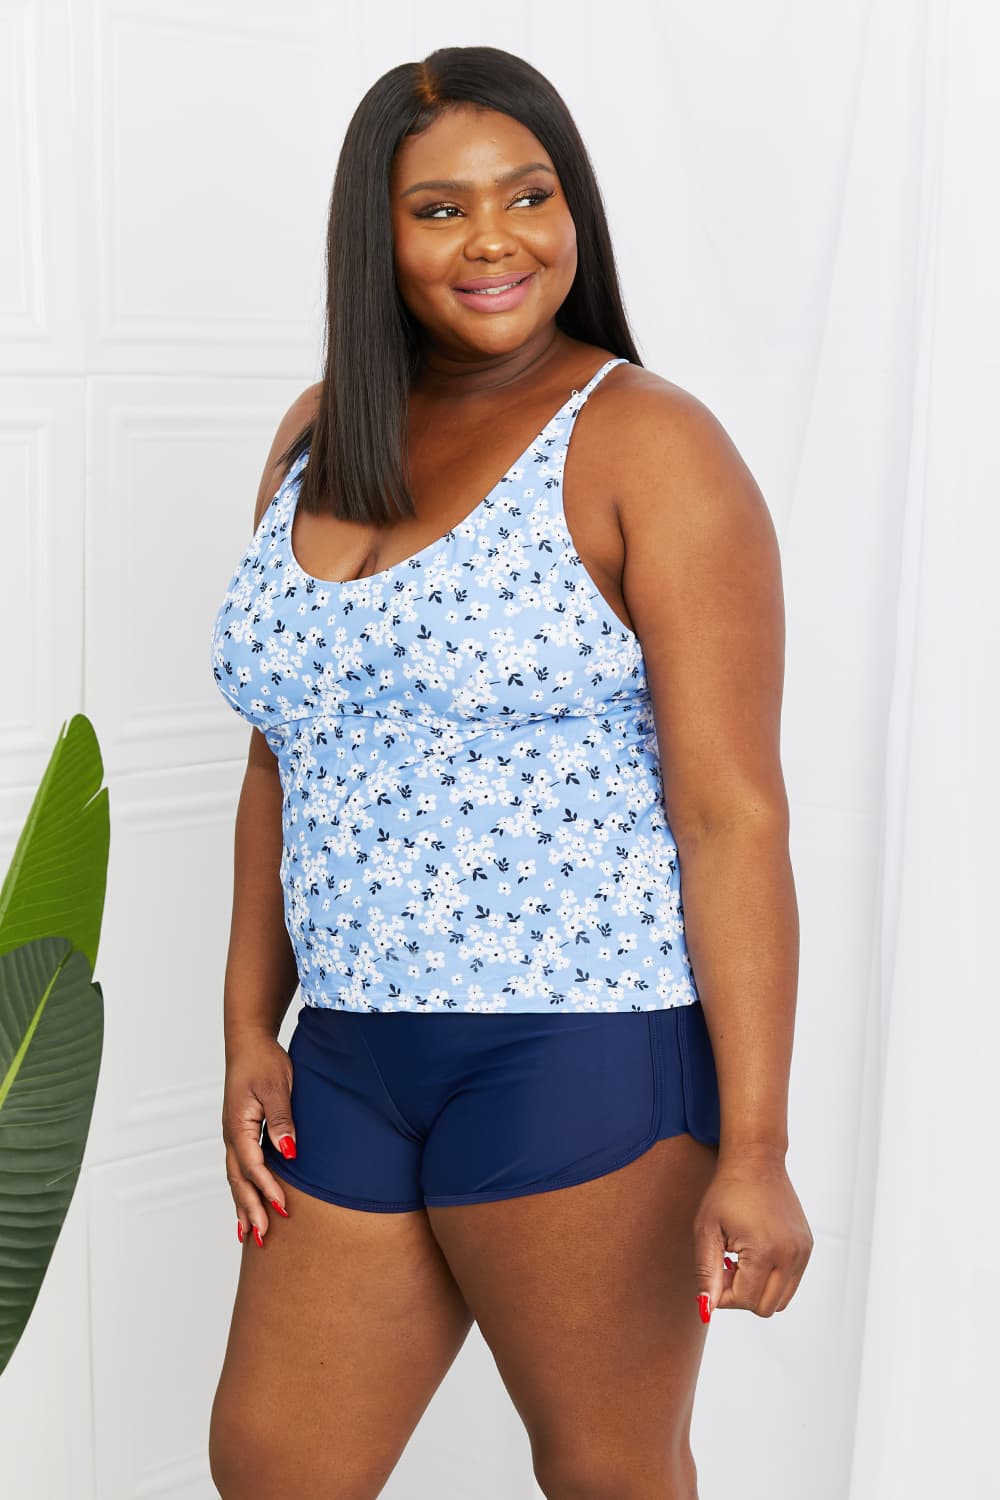 Marina West Swim By The Shore Plus Size Two-Piece Swimsuit in Blossom Navy Sunset and Swim   